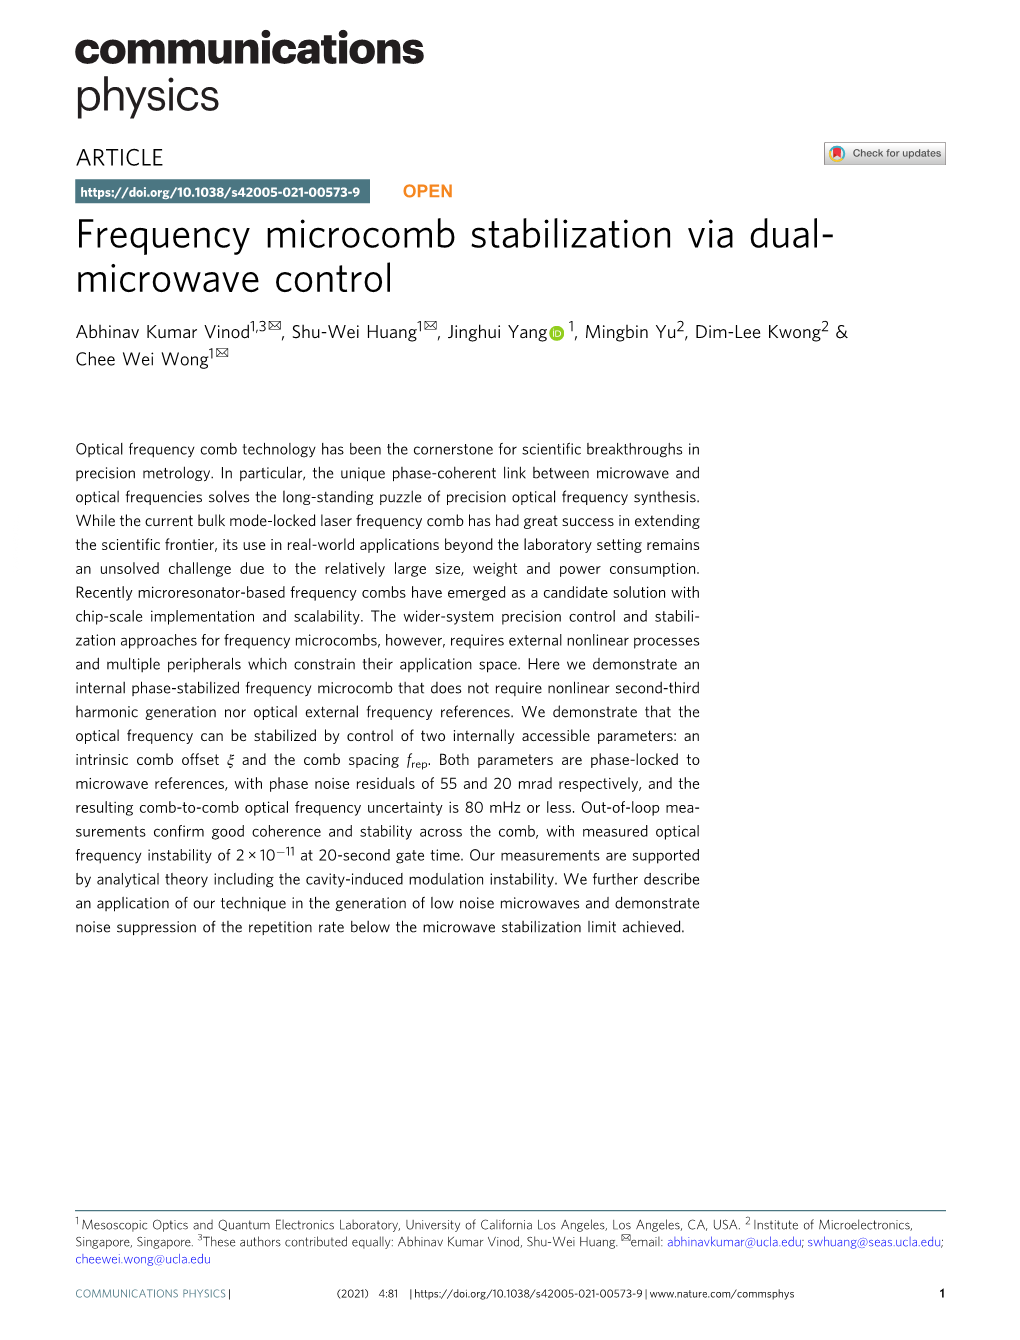 Frequency Microcomb Stabilization Via Dual-Microwave Control